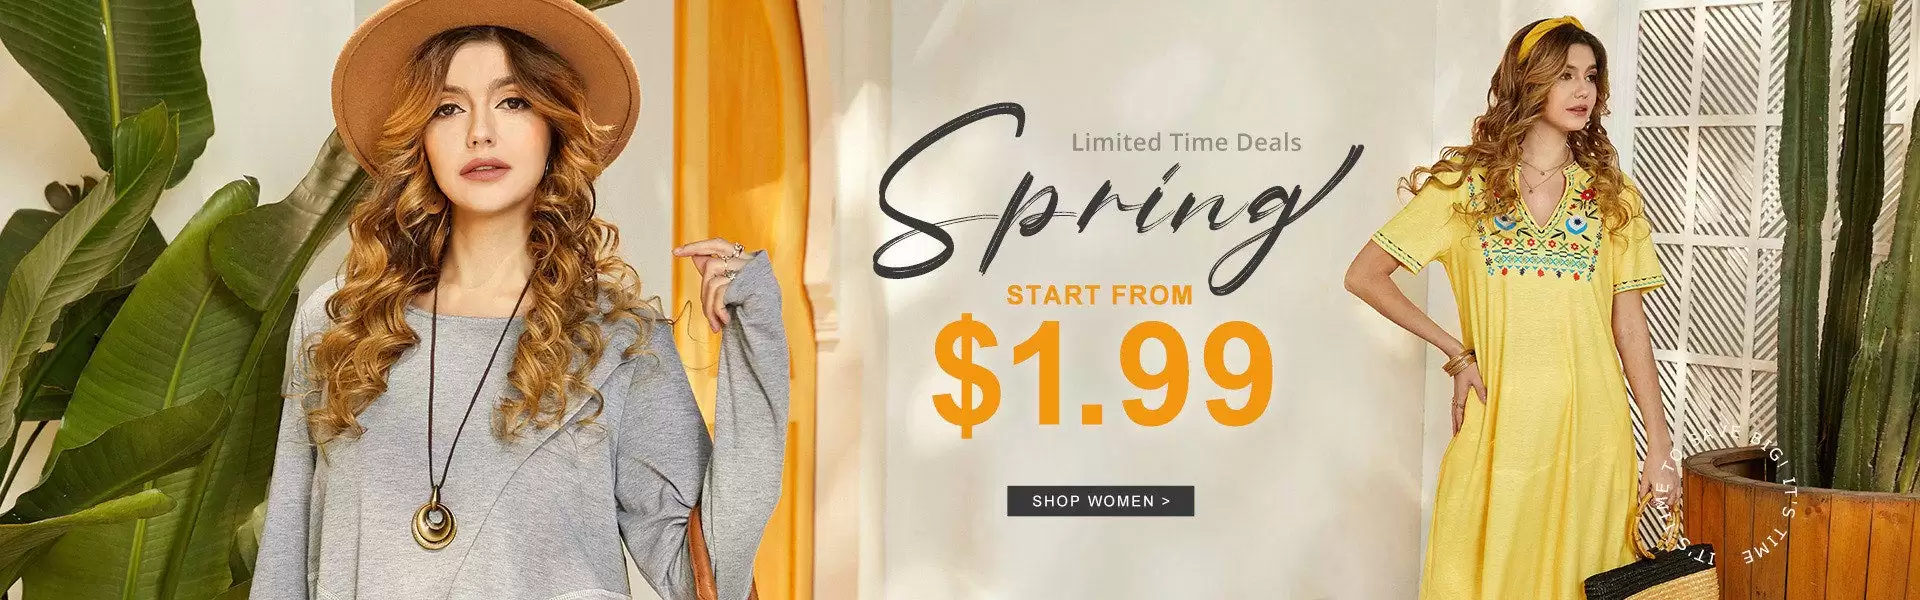 Buy Styles As Low As $1.99 At Newchic Deal Page